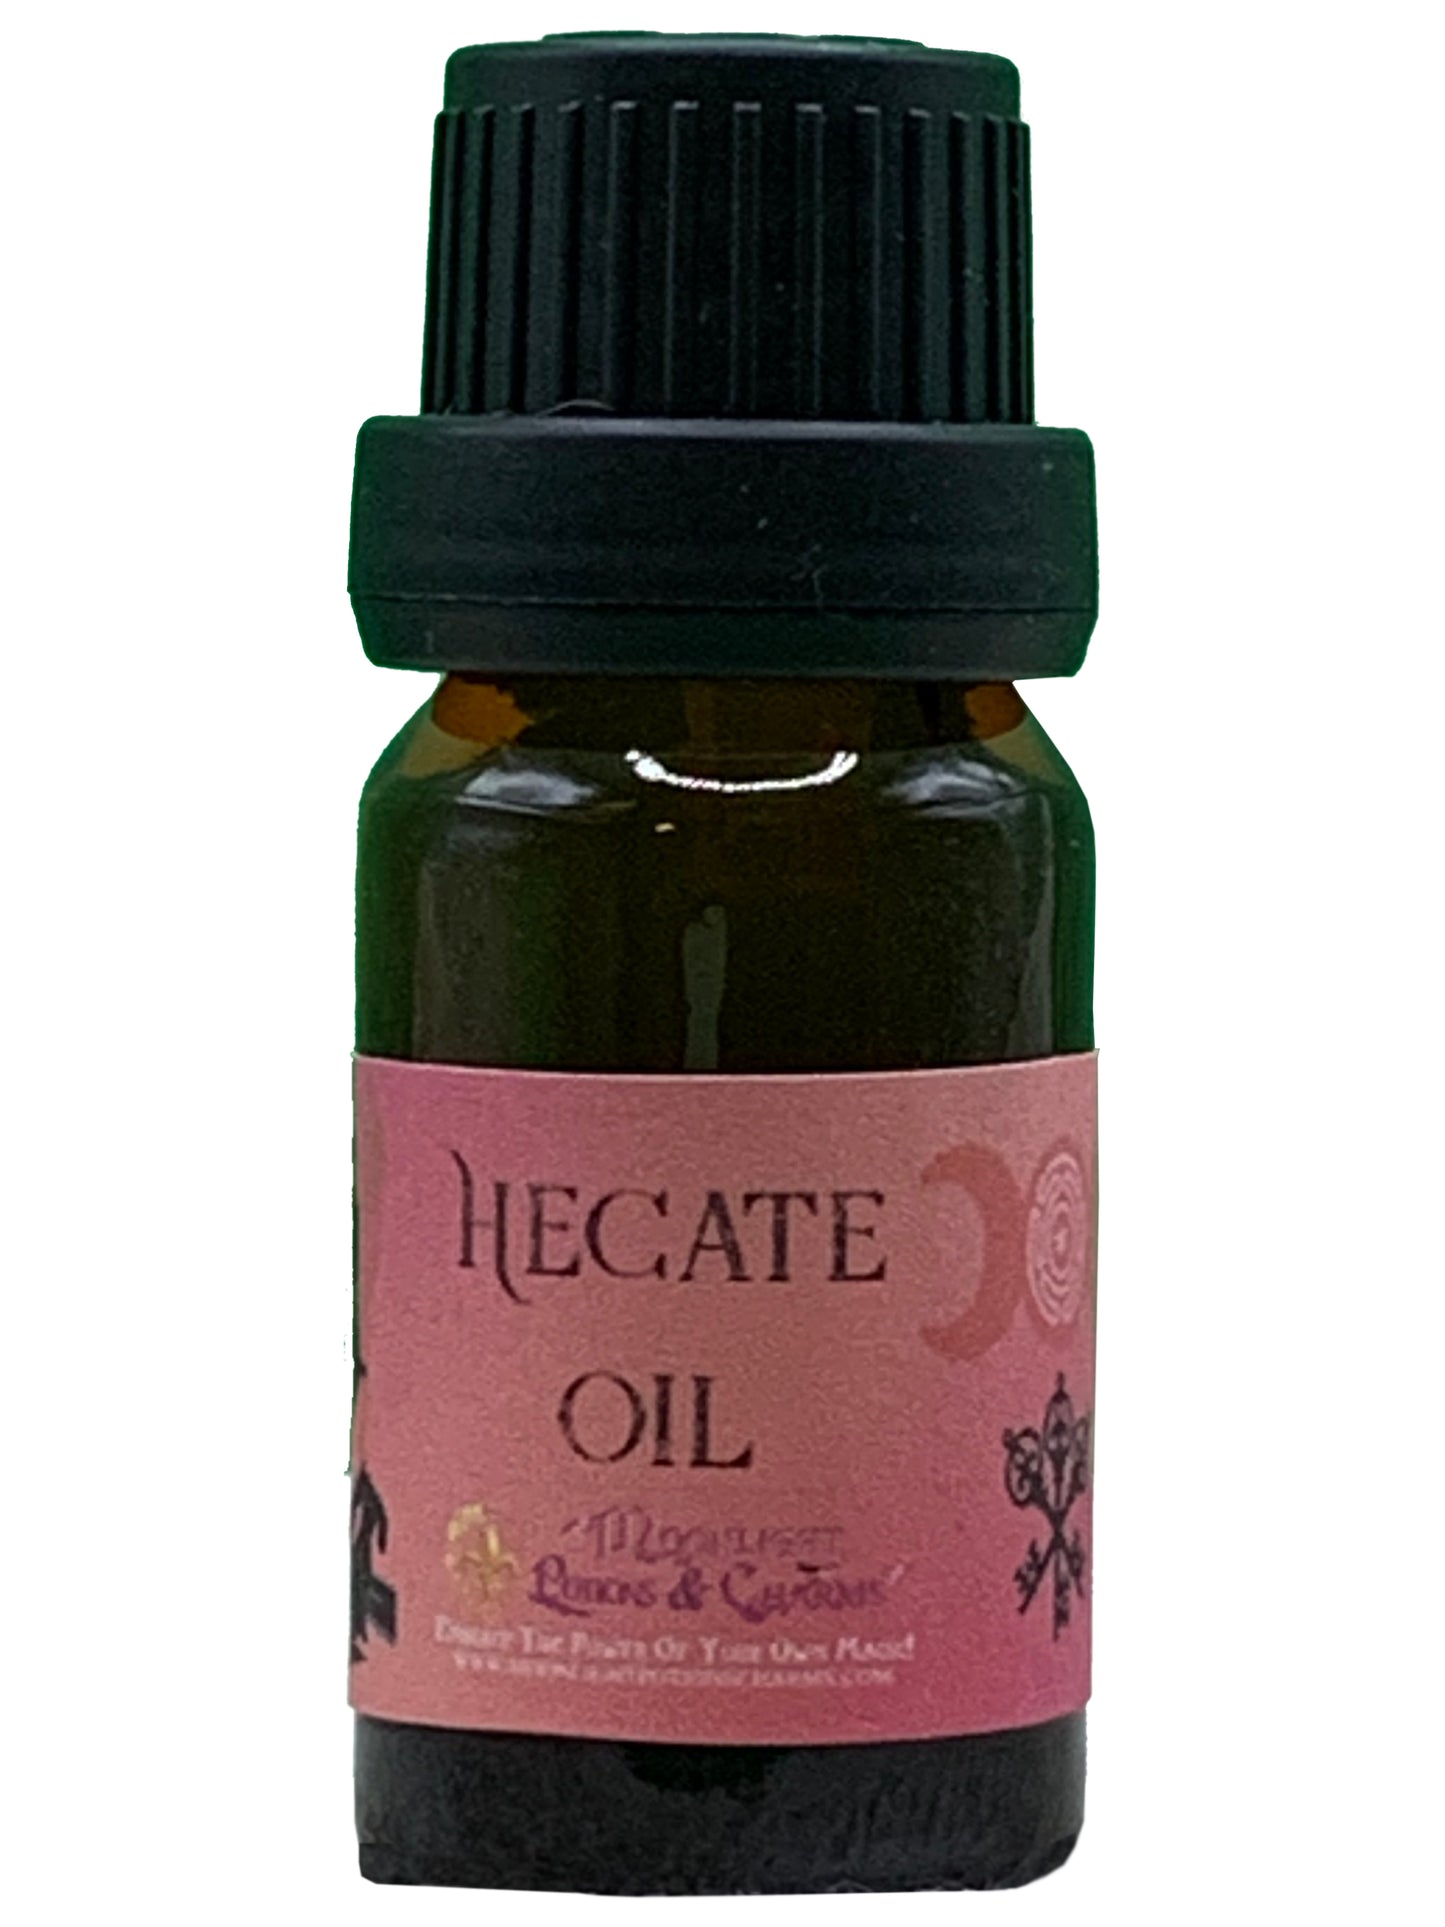 Hecate Oil - Moonlight Potions & Charms